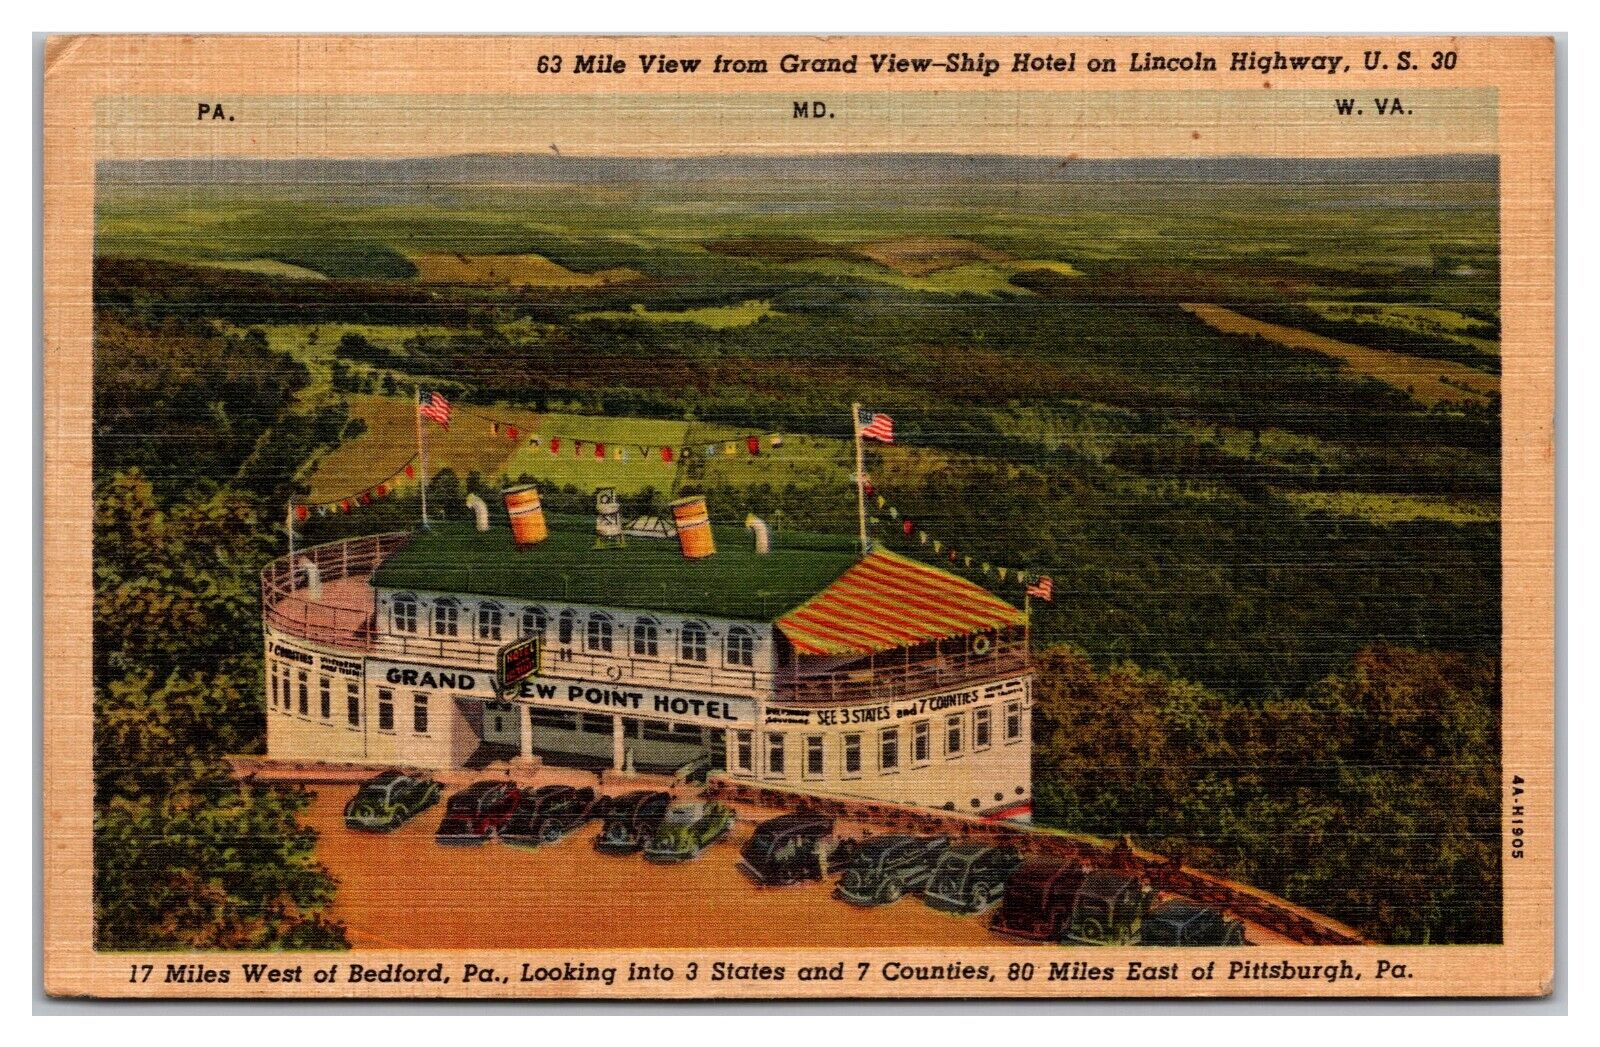 Mile View From Grand View Ship Hotel On Lincoln Highway, U.S. 30 WV Postcard